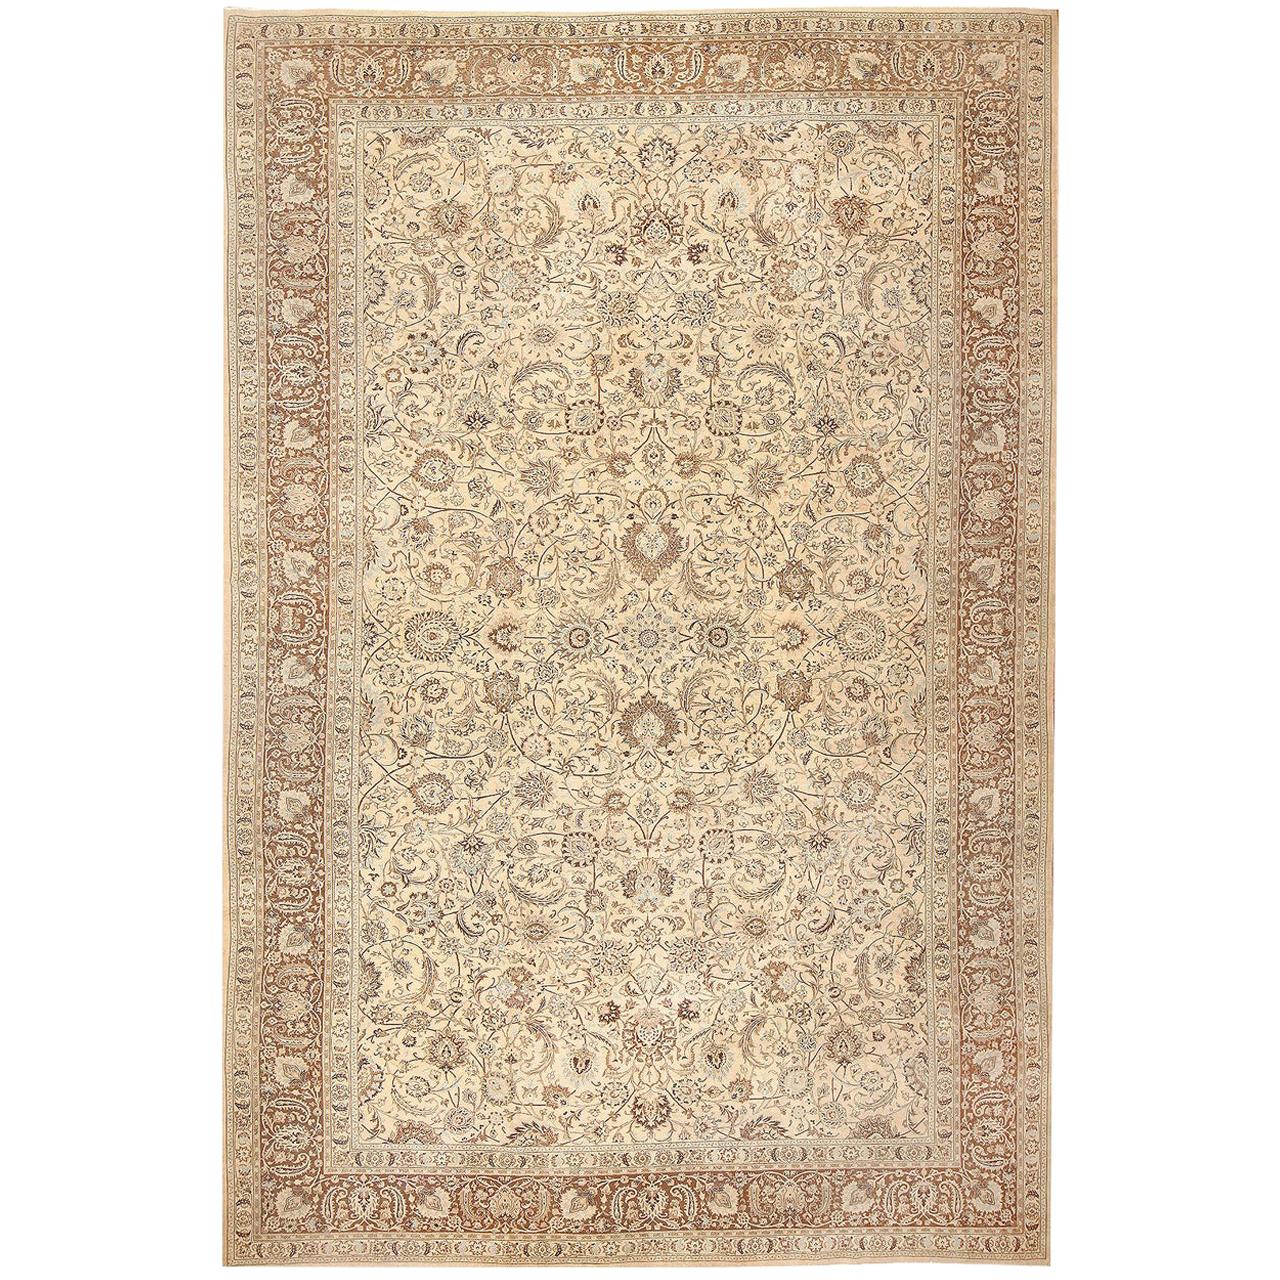 Antique Brown Khorassan Rug. Size: 15 ft 4 in x 23 ft 8 in For Sale